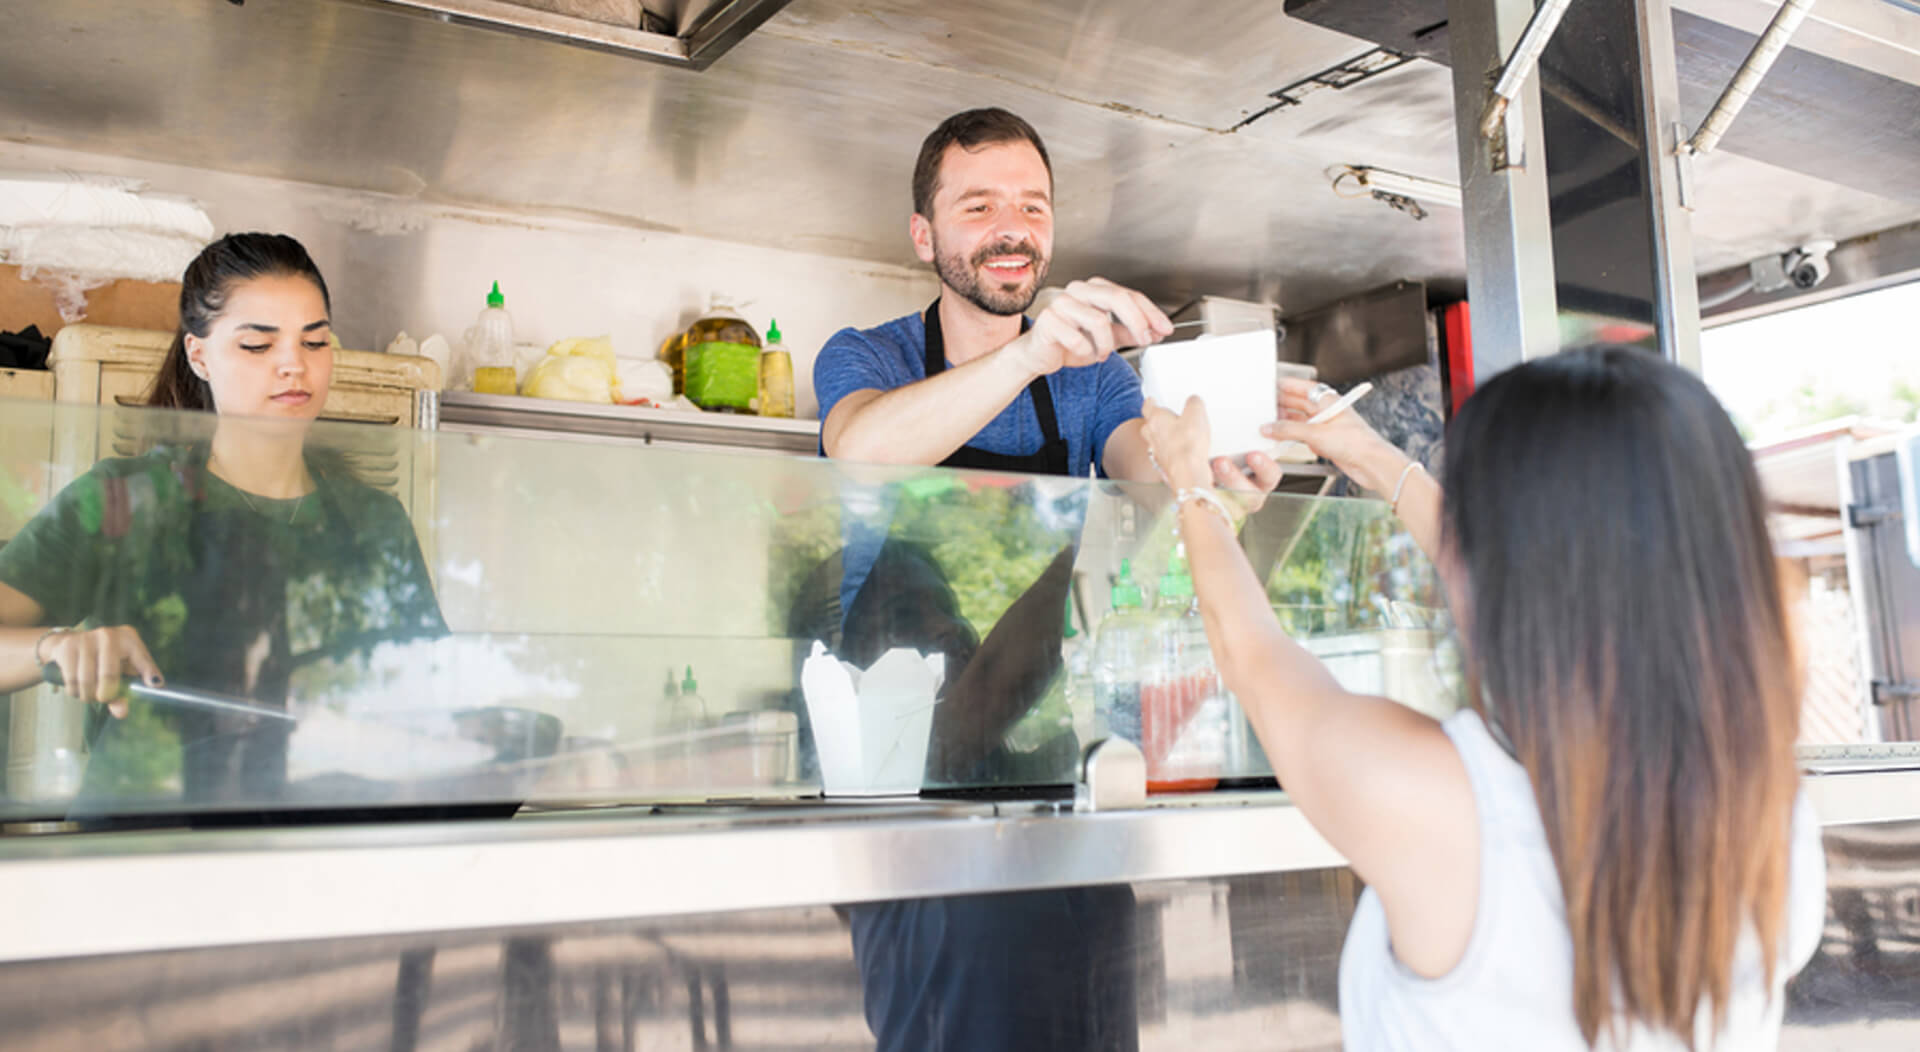 food truck server in a food truck handing over a box with oriental food to a female diner